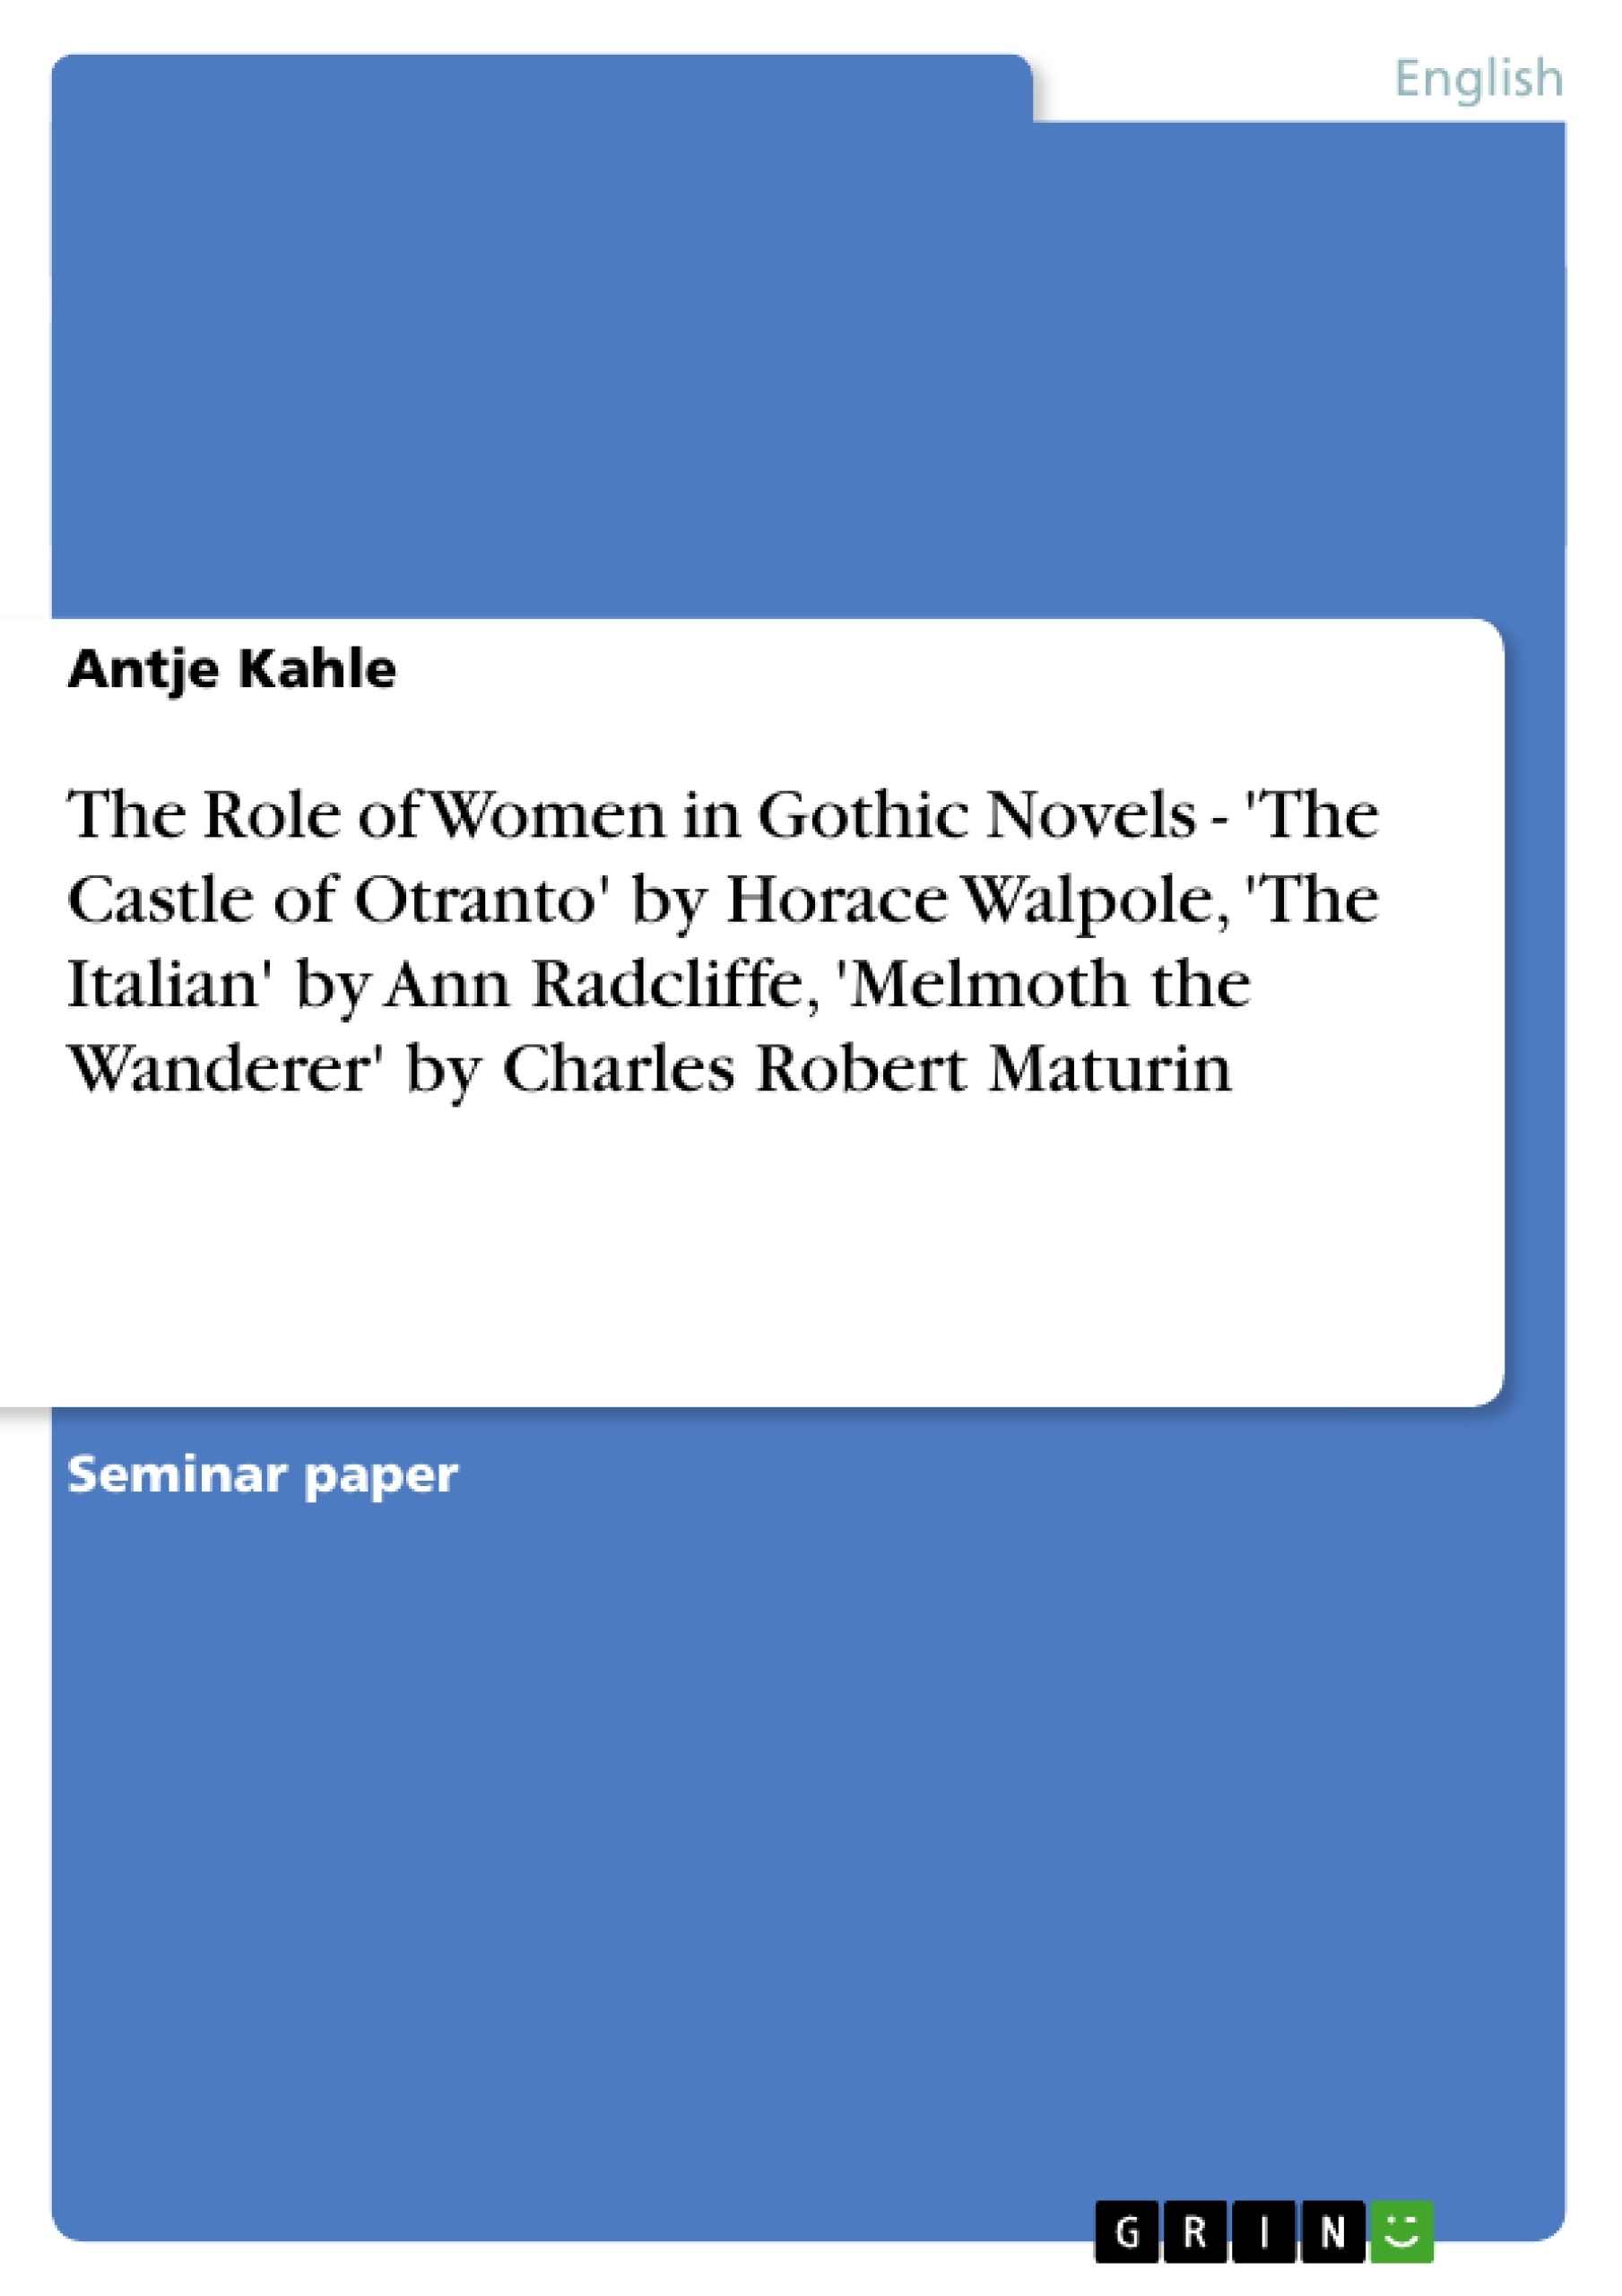 Title: The Role of Women in Gothic Novels - 'The Castle of Otranto' by Horace Walpole, 'The Italian' by Ann Radcliffe, 'Melmoth the Wanderer' by Charles Robert Maturin